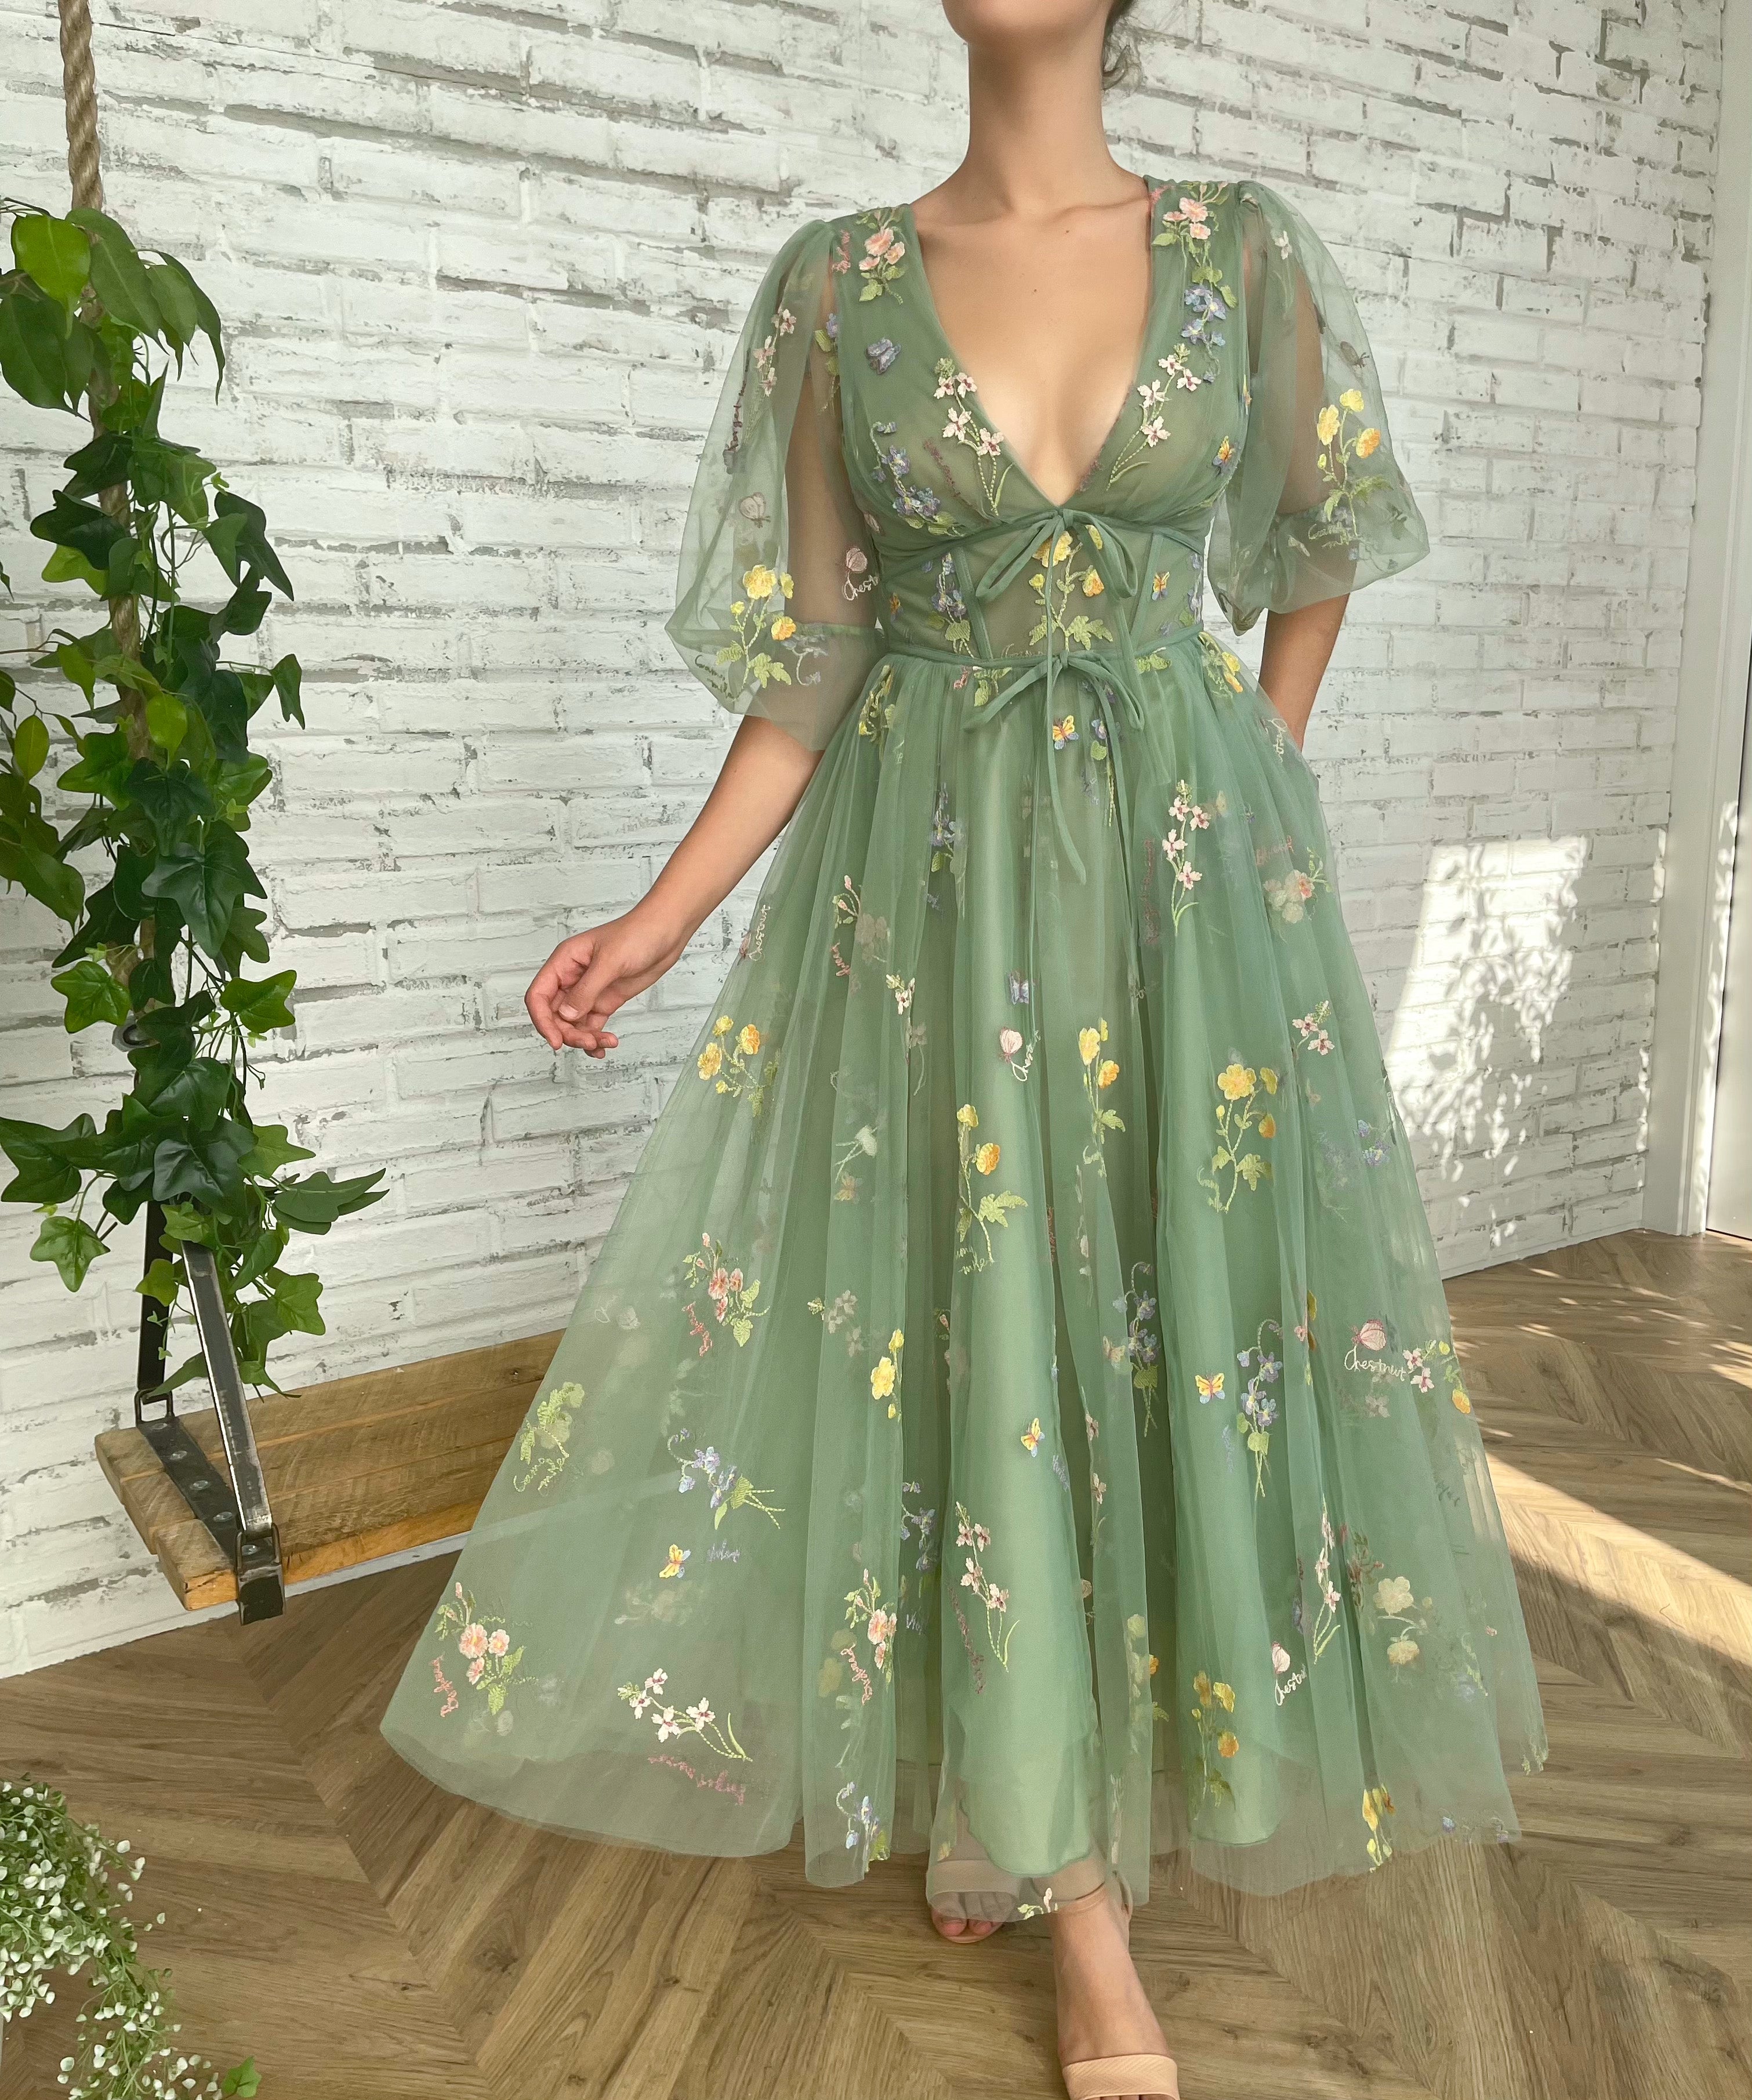 Green midi dress with short sleeves, flowers and v-neck